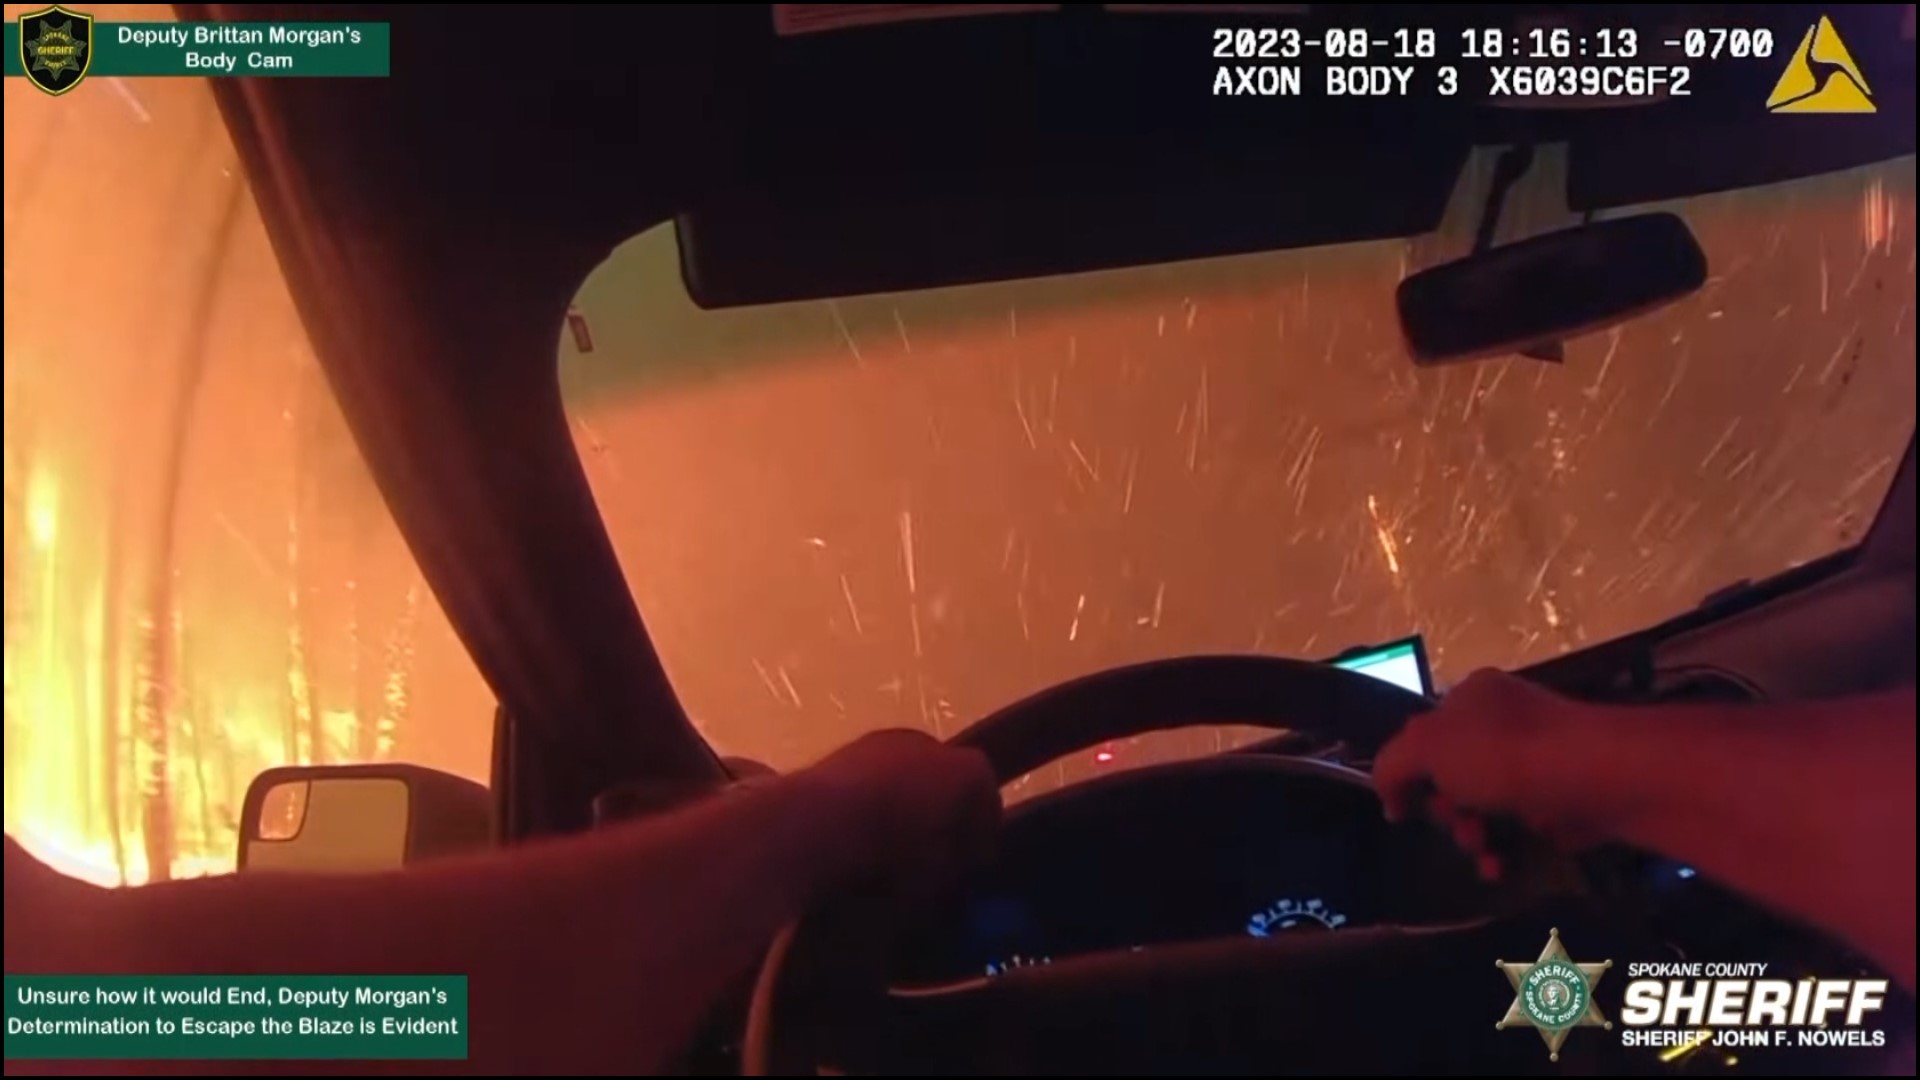 After evacuating as many people as possible, Deputy Brittan Morgan came face-to-face with the fire. His trip through the flames was captured on his body camera.